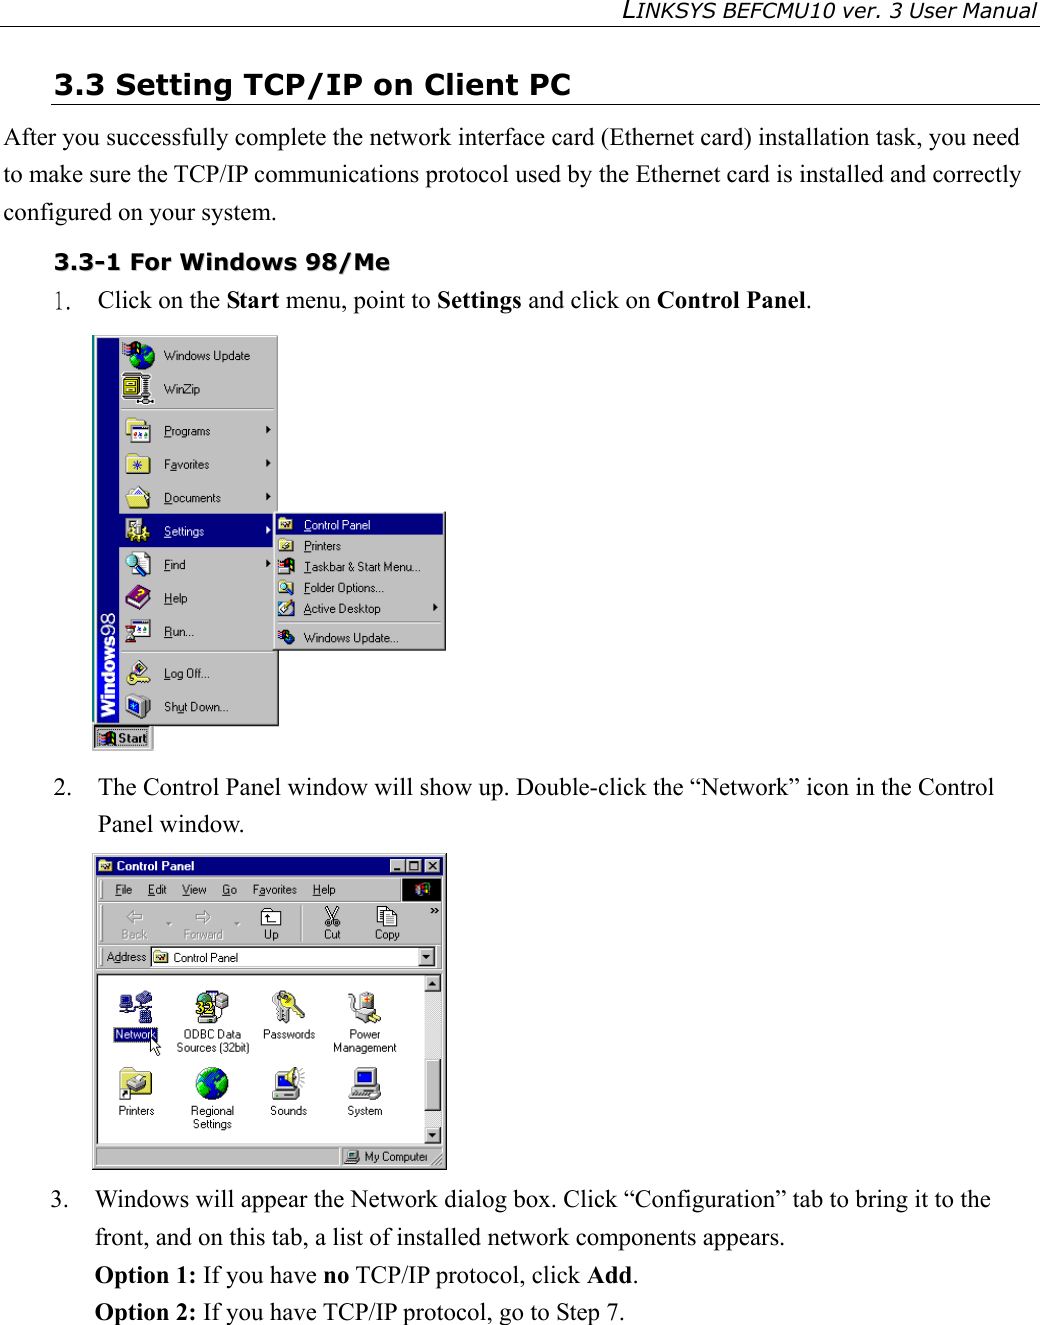 LINKSYS BEFCMU10 ver. 3 User Manual   3.3 Setting TCP/IP on Client PC After you successfully complete the network interface card (Ethernet card) installation task, you need to make sure the TCP/IP communications protocol used by the Ethernet card is installed and correctly configured on your system.  33..33--11  FFoorr  WWiinnddoowwss  9988//MMee  1.  Click on the Start menu, point to Settings and click on Control Panel.  2.  The Control Panel window will show up. Double-click the “Network” icon in the Control Panel window.    3.  Windows will appear the Network dialog box. Click “Configuration” tab to bring it to the front, and on this tab, a list of installed network components appears.   Option 1: If you have no TCP/IP protocol, click Add. Option 2: If you have TCP/IP protocol, go to Step 7.   